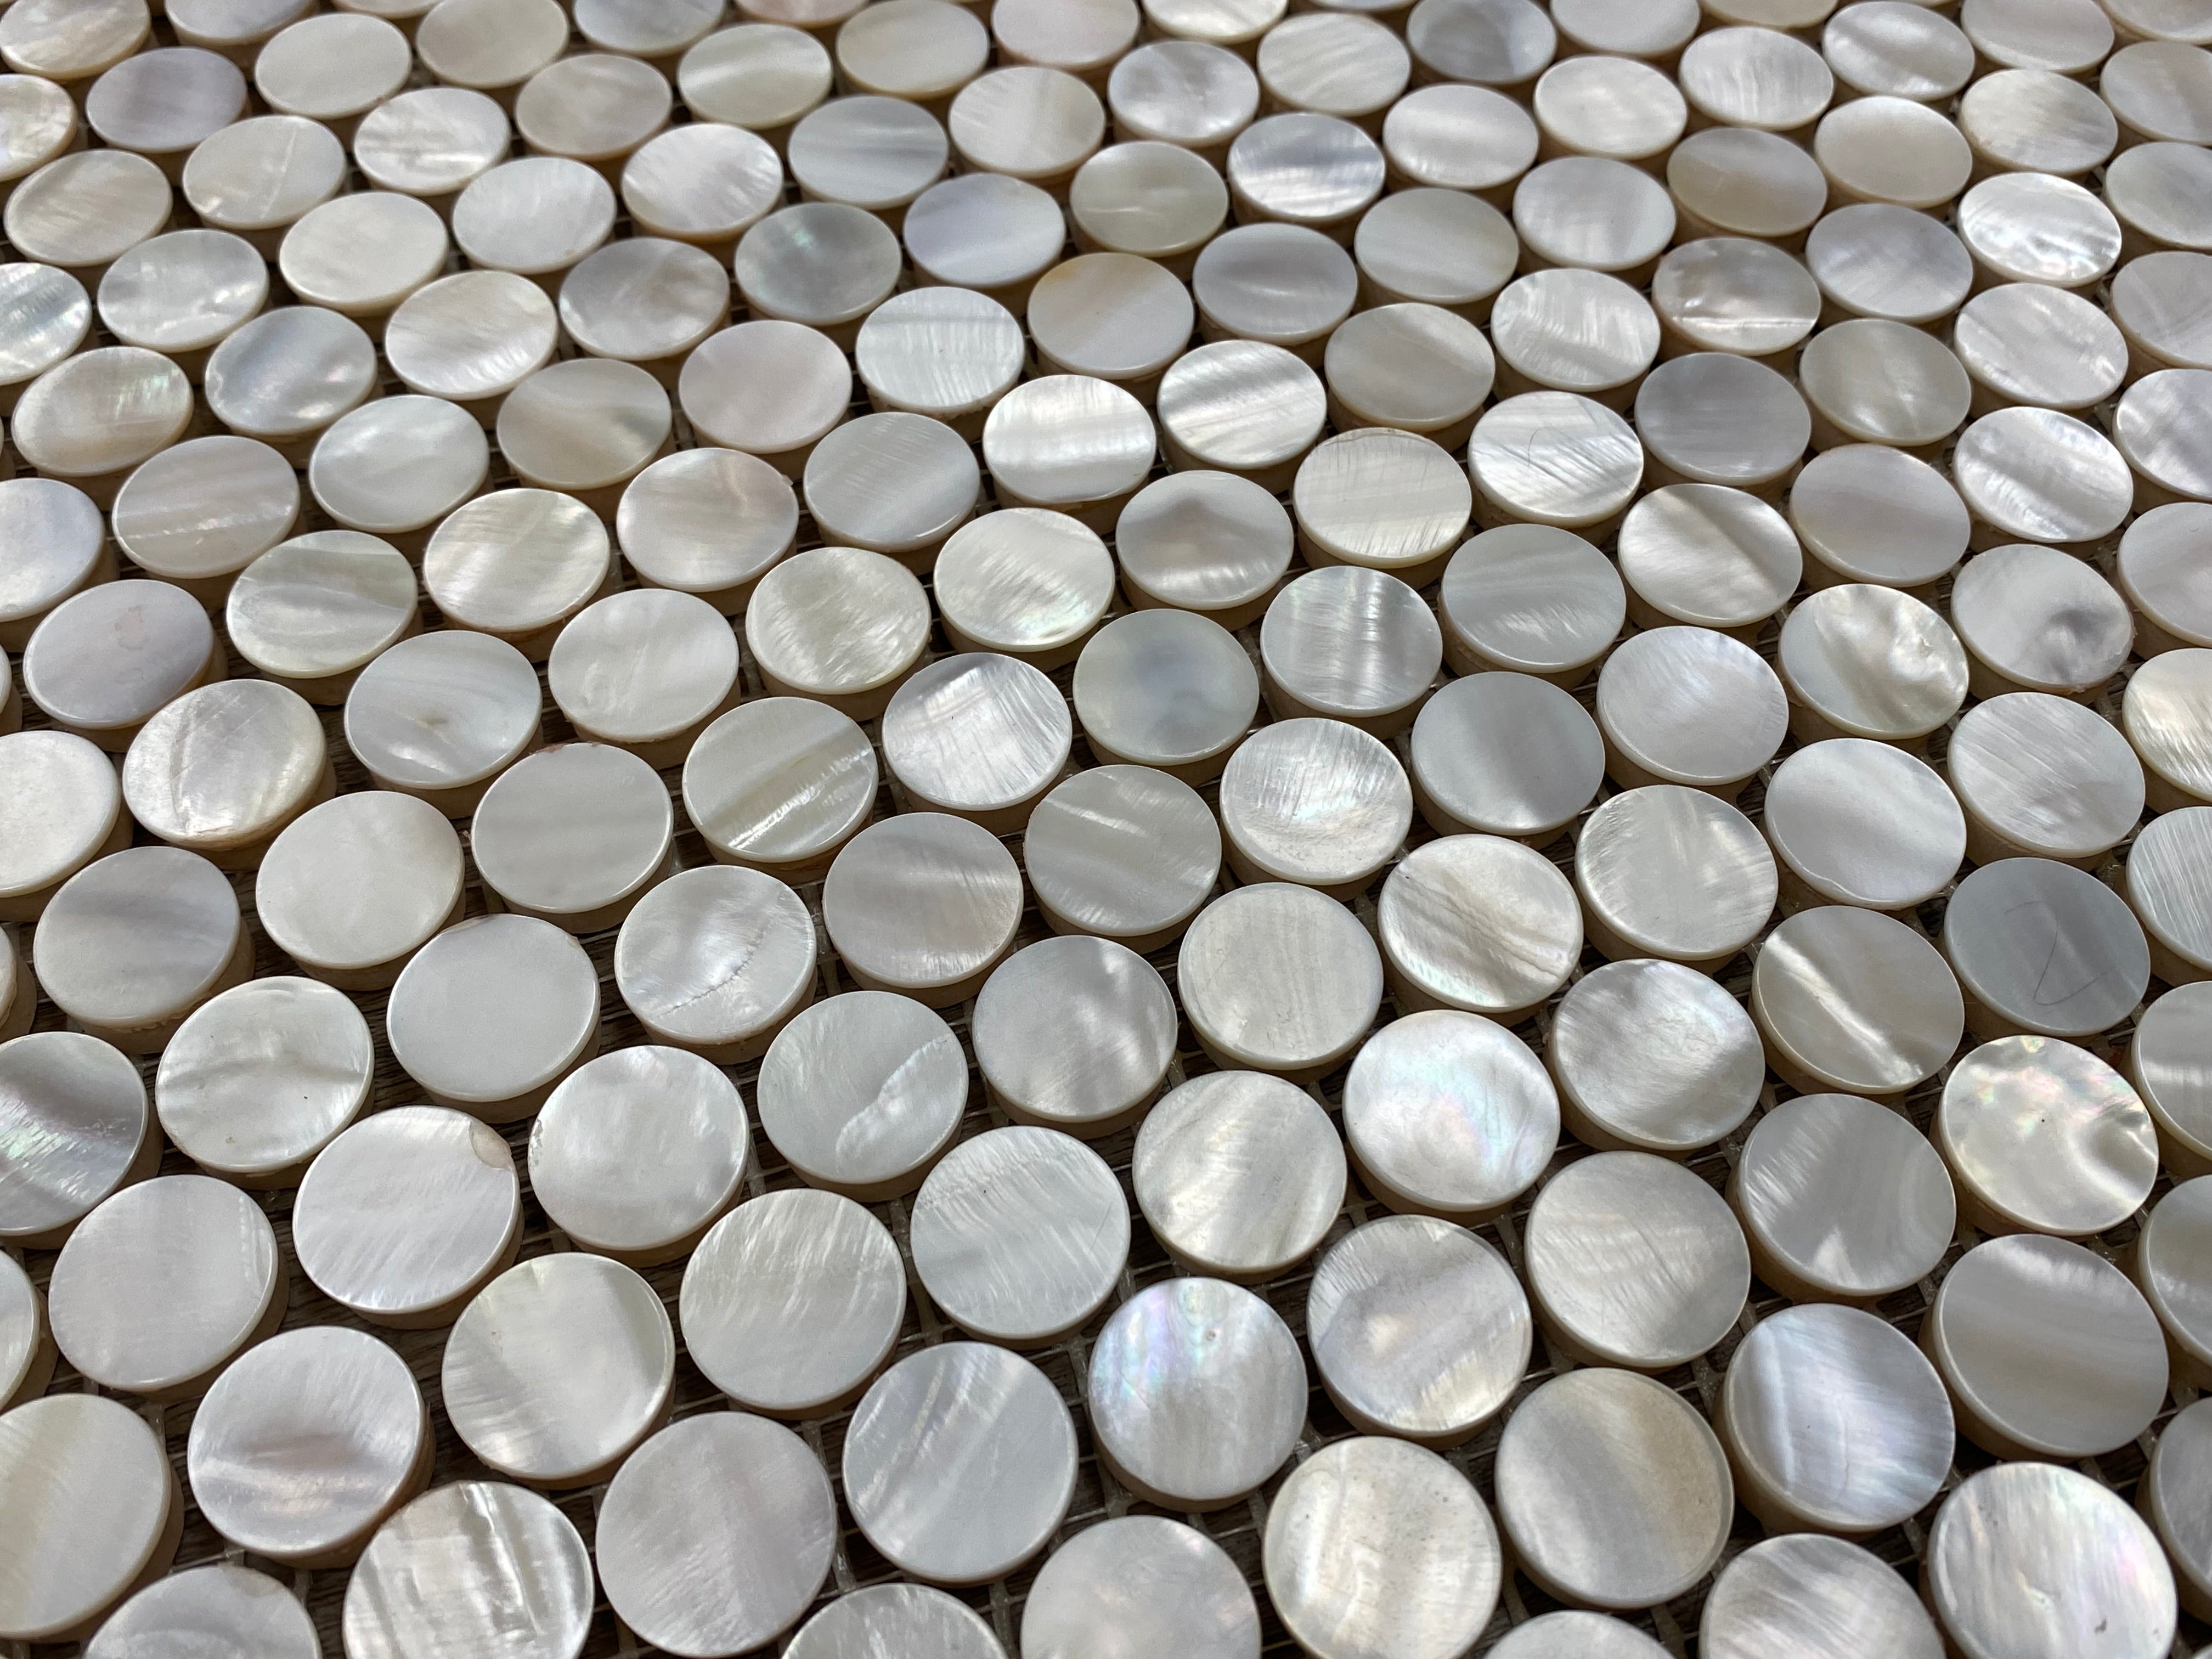 Seashell Natural Pearl Mother of Pearl Penny Round 3/4 Inch Mosaic Wall Tile with Backing for Kitchen Backsplash, Bathroom Shower, Accent Walls